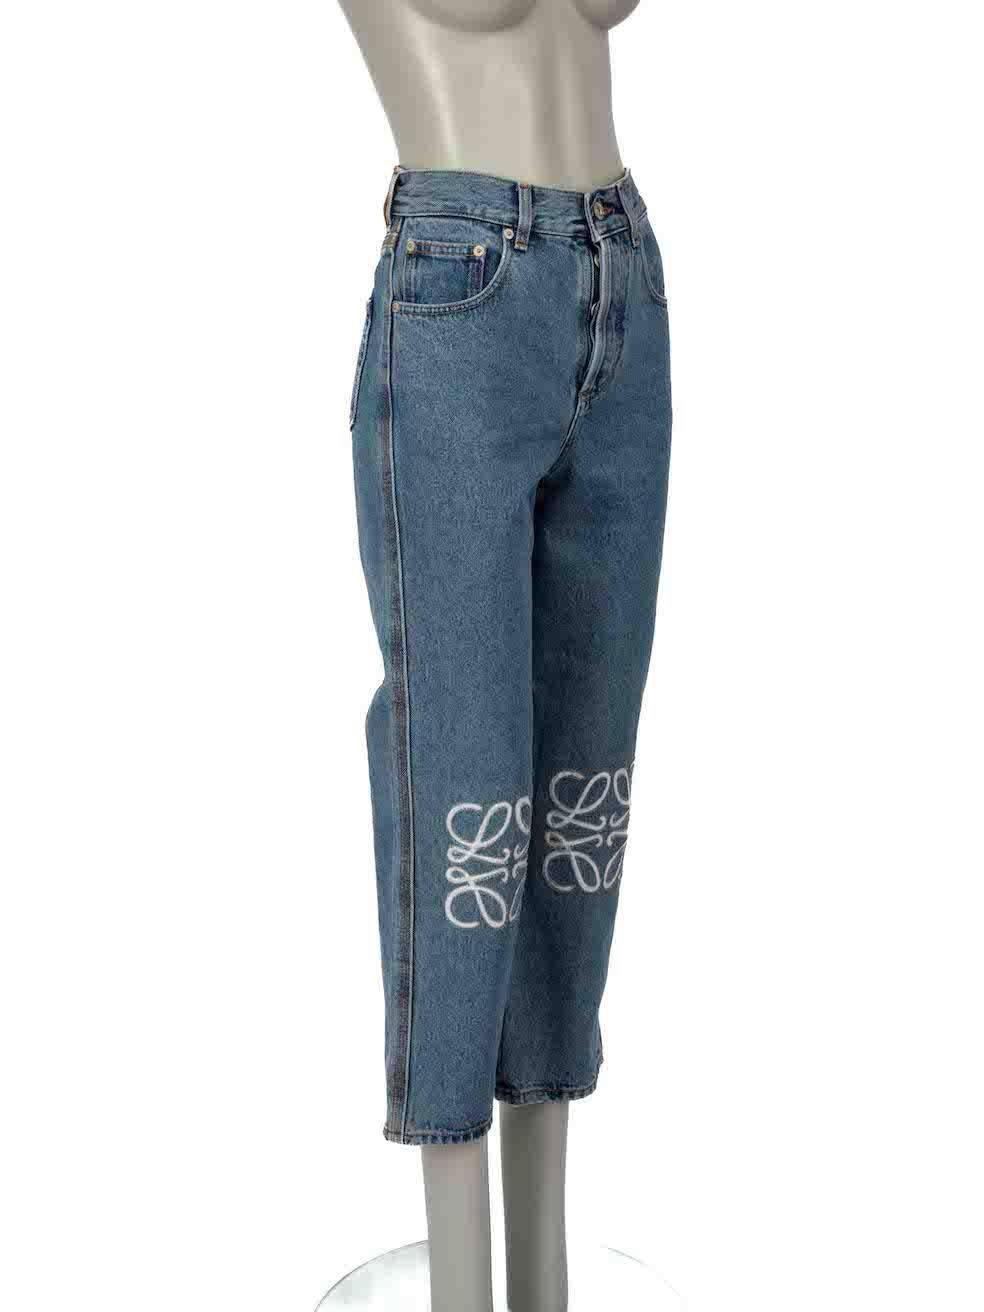 CONDITION is Very good. Hardly any visible wear to jeans is evident on this used Loewe designer resale item, however the composition and size labels have been removed. Please note that the cuffs of the jeans are deliberately distressed.
 
 
 
